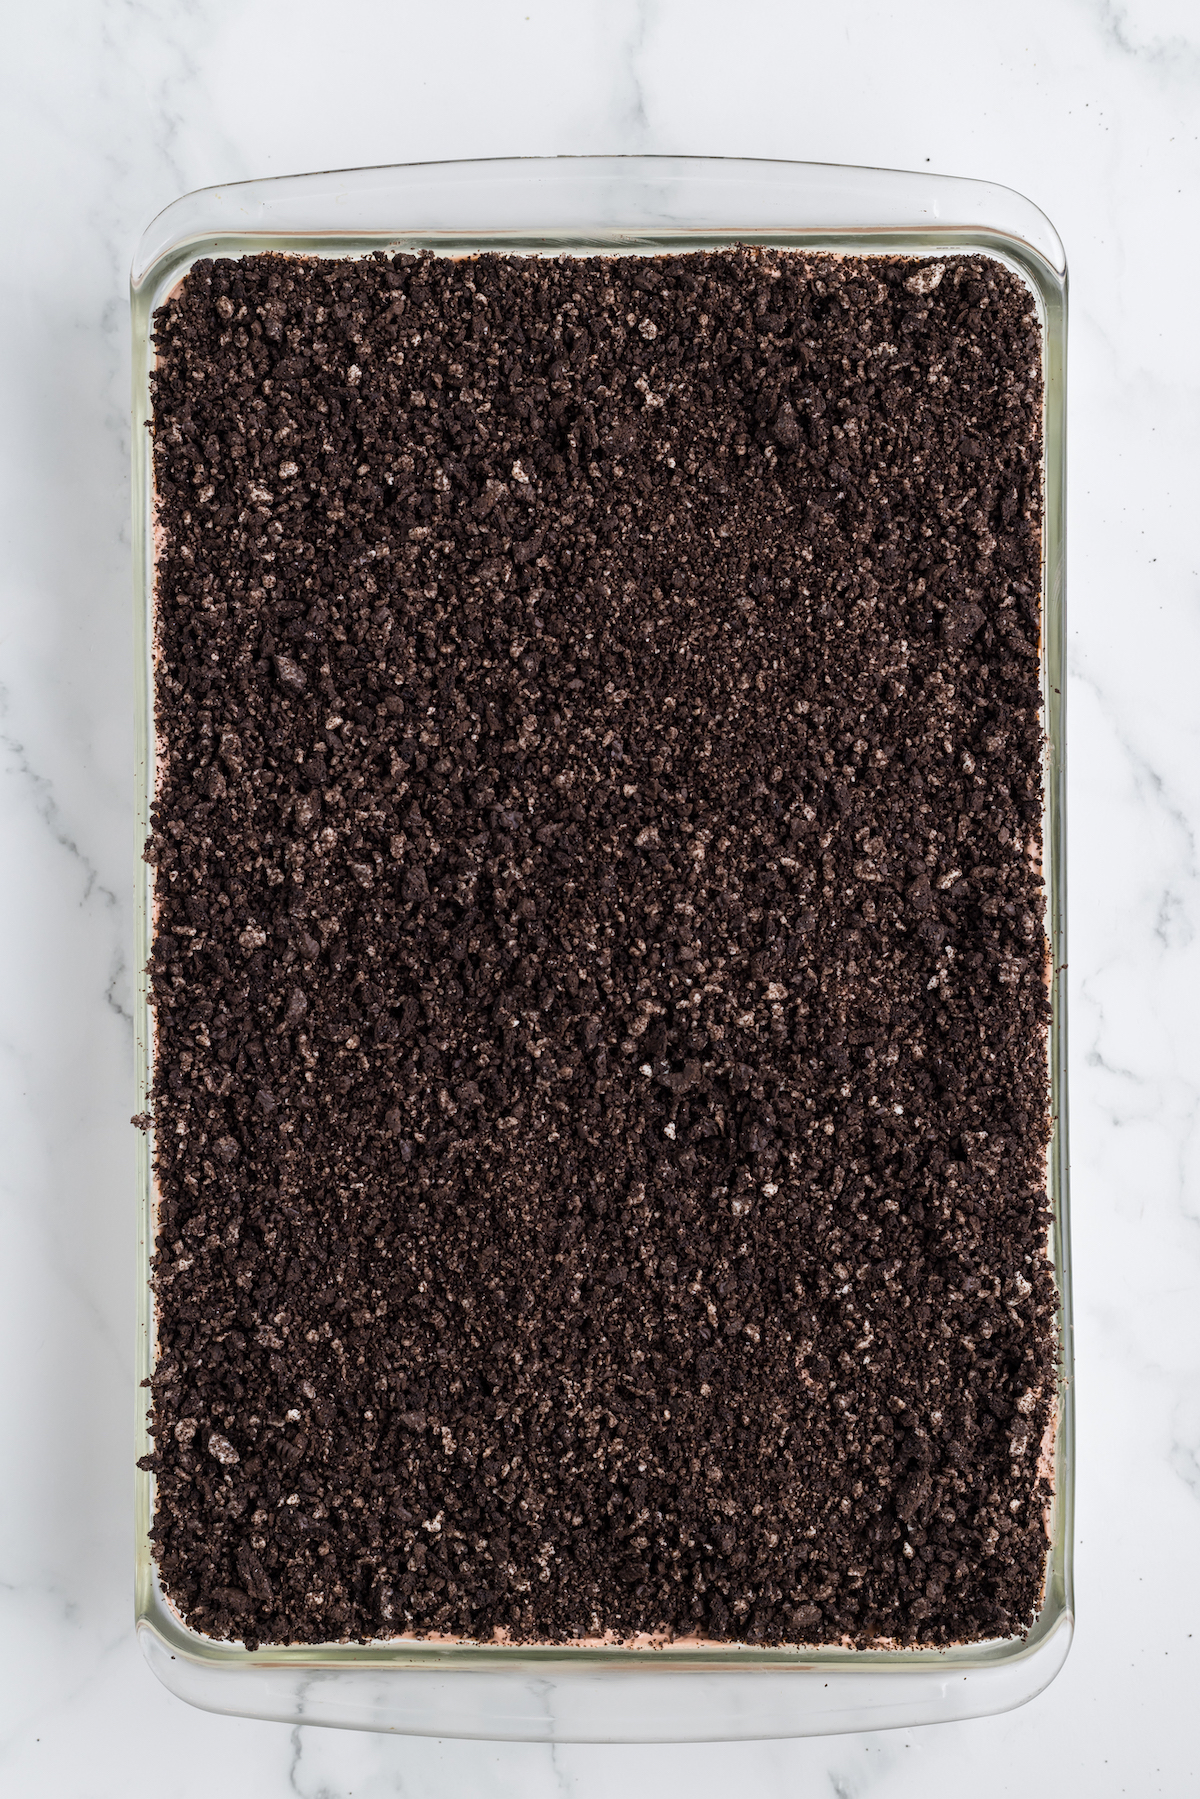 crushed oreo cookie layer for dirt cake, overhead view